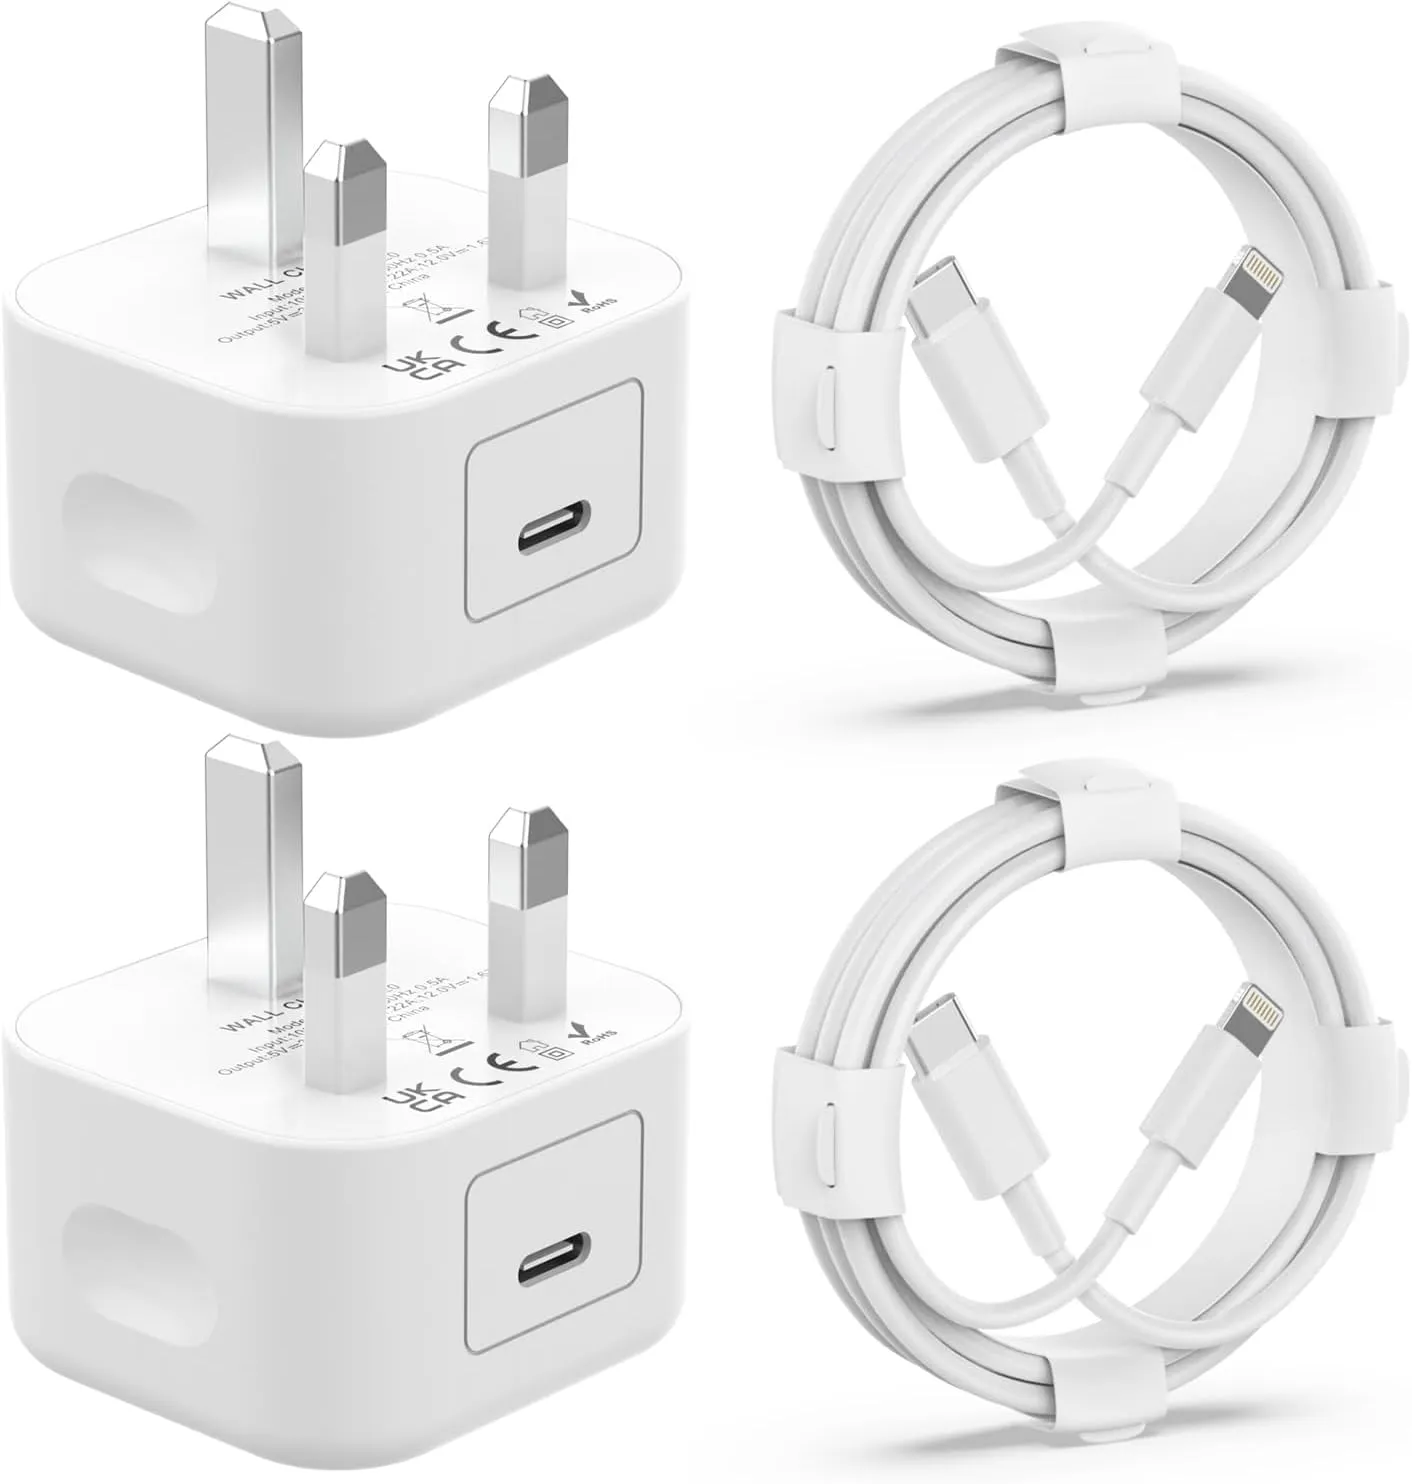 USB C Power Adapter with Fast Charging Cables